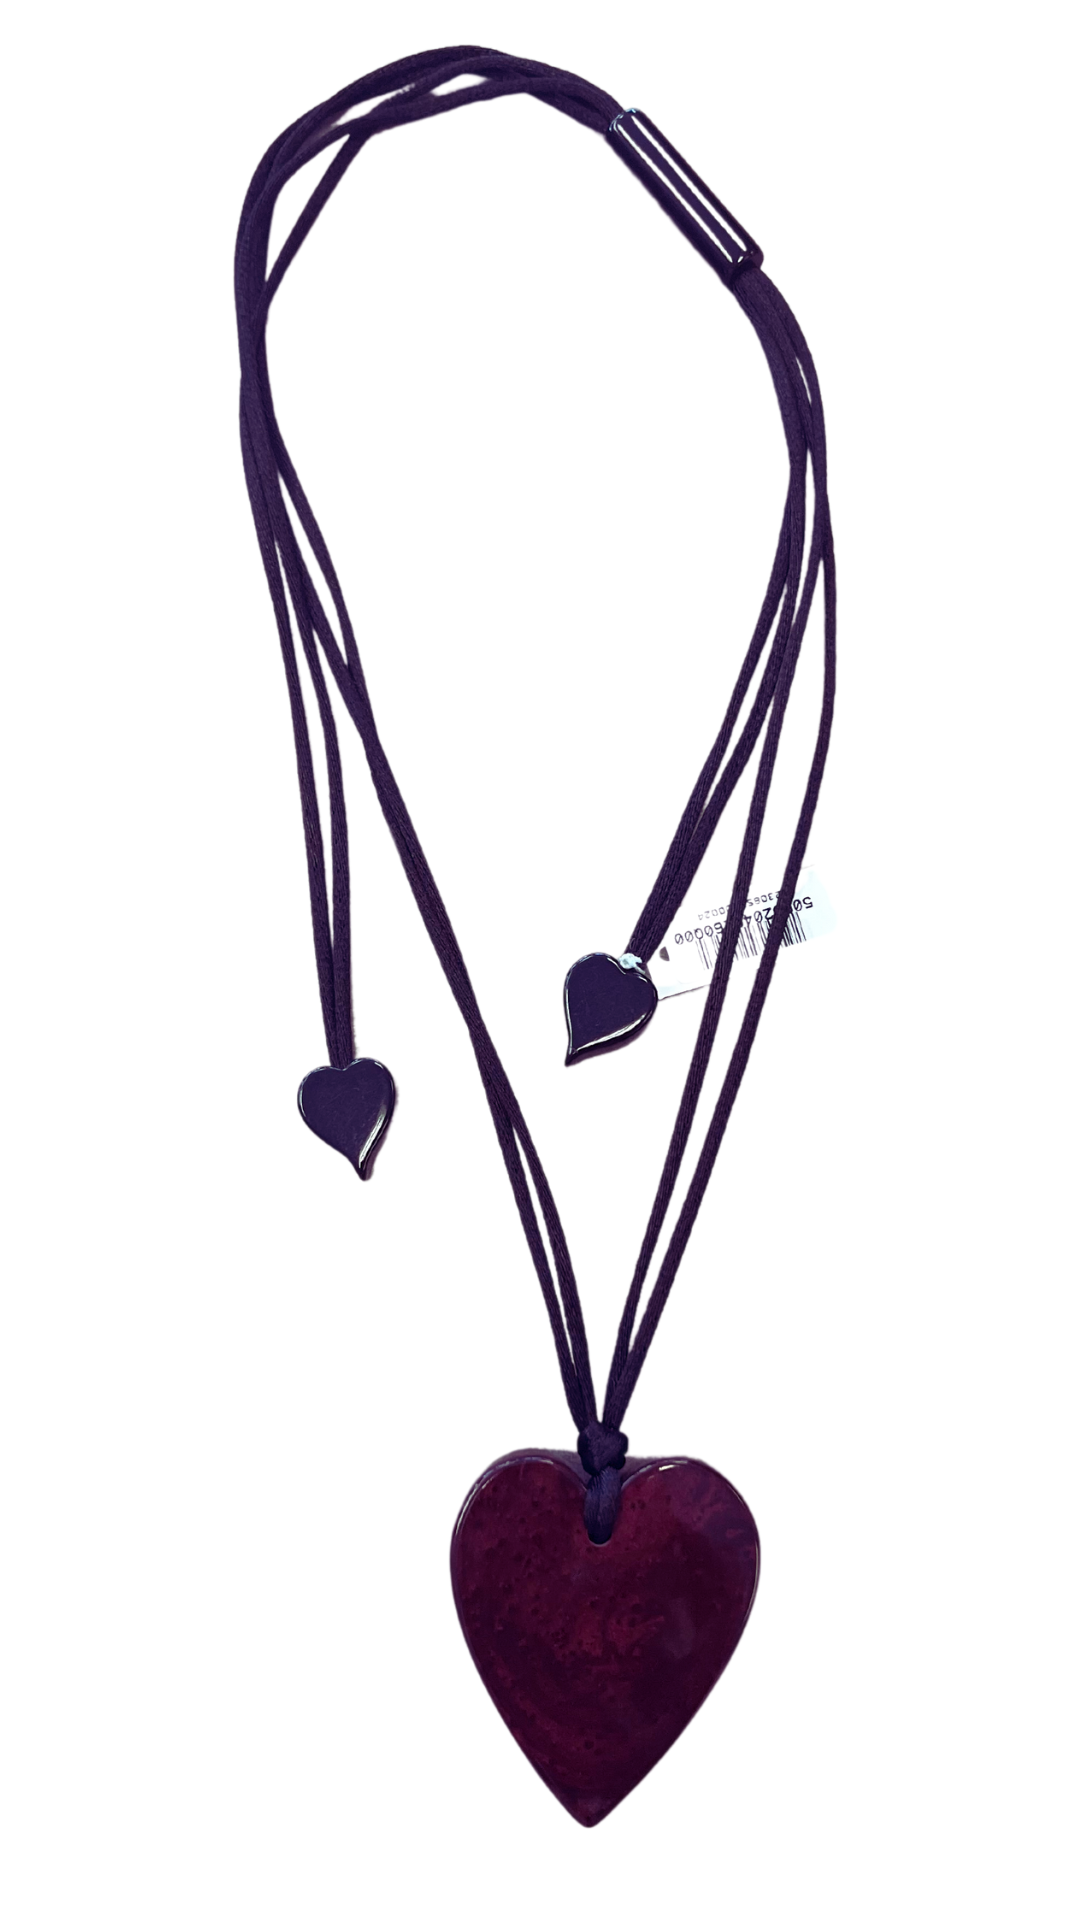 Colourful Statement Collection - Small Burgundy Reversible Heart Necklace. Style 50602049260Q00